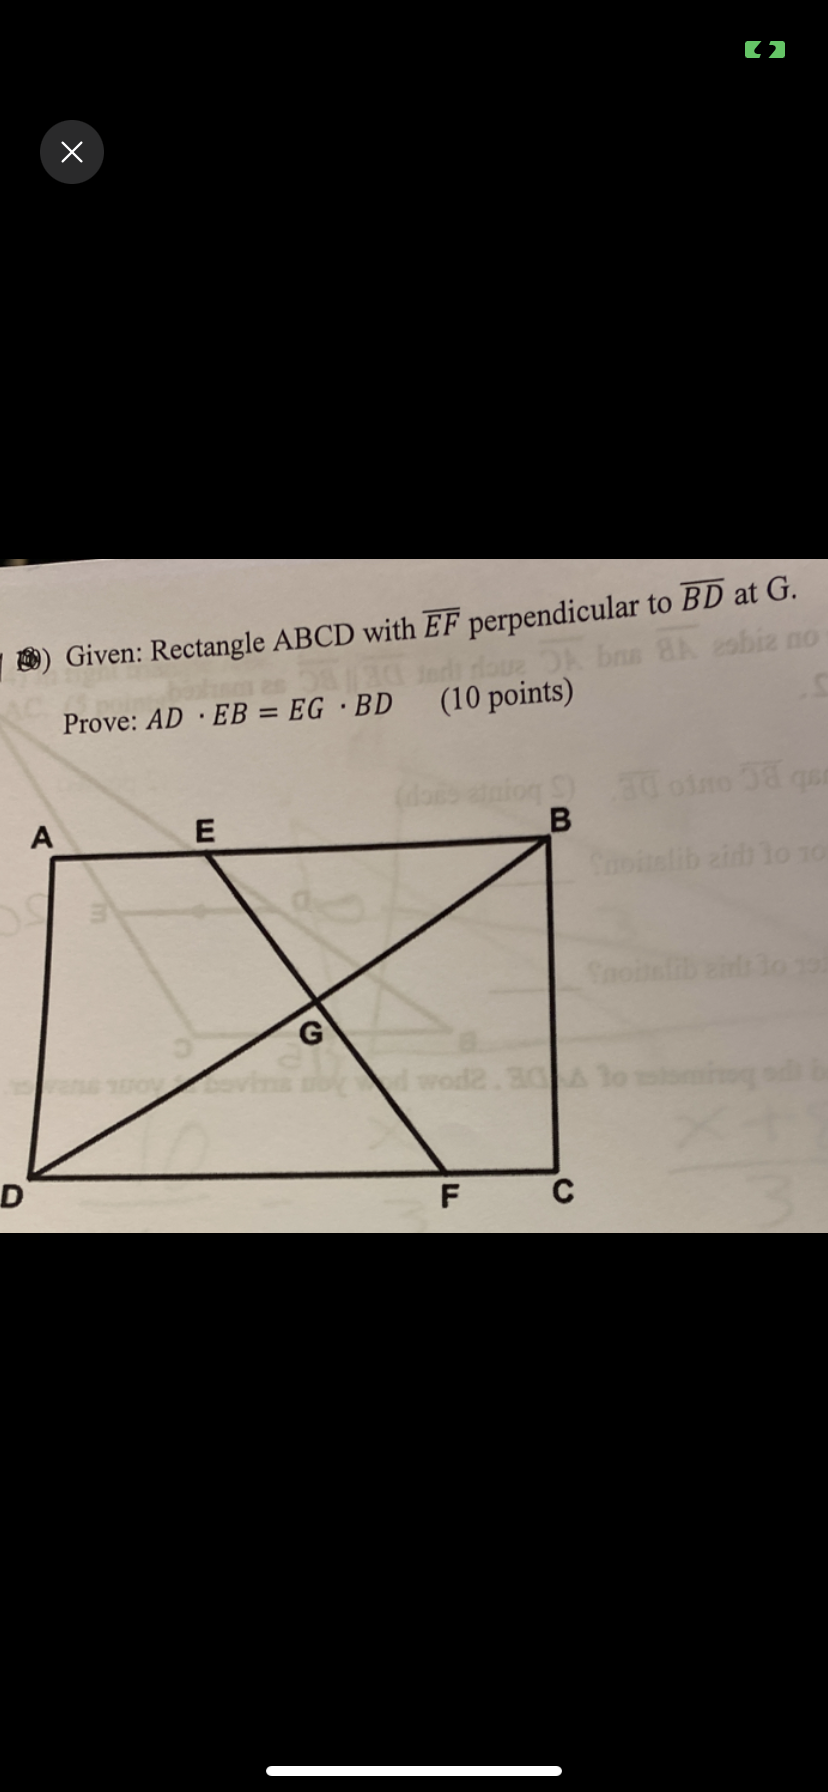 ®) Given: Rectangle ABCD with EF perpendicular to BD at G.
loue OA bns 8A 2obiz no
Prove: AD · EB = EG ·BD (10 points)
%3D
30 oino 38 qeE
A
Saoitelib zidh lo 10
Snoislib eins lo 192
wod2.30 A lo omieg od b
F
